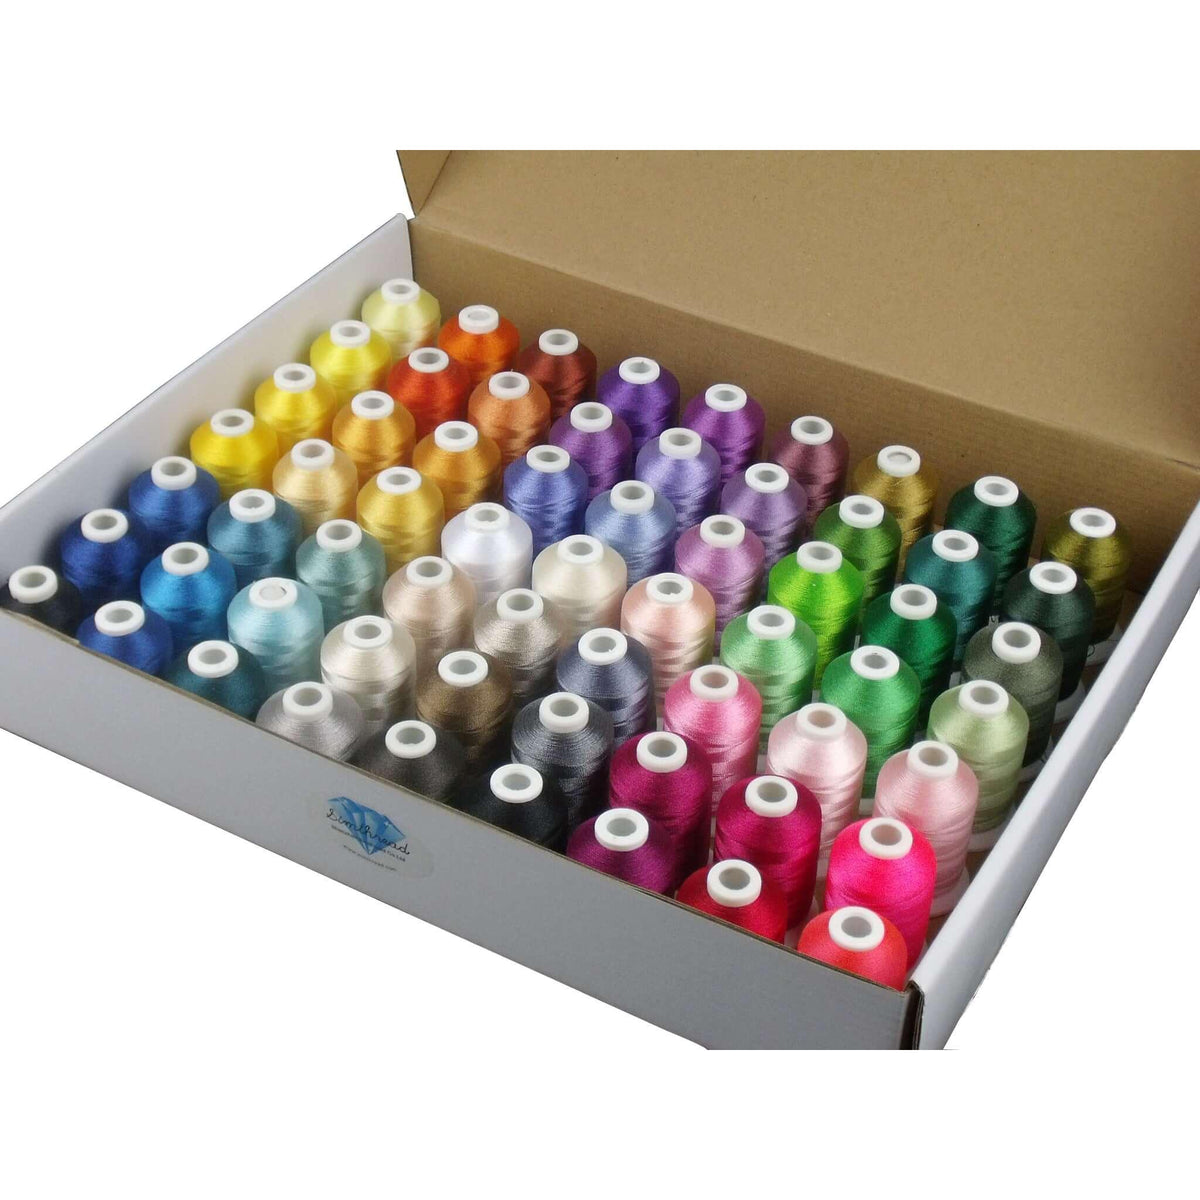 Polyester　Machine　Kit　Quality　Thread　Colors　Embroidery　—　Simthread　40　Machine　High　Simthread　63　Thread　Embroidery　Brother　Supplier